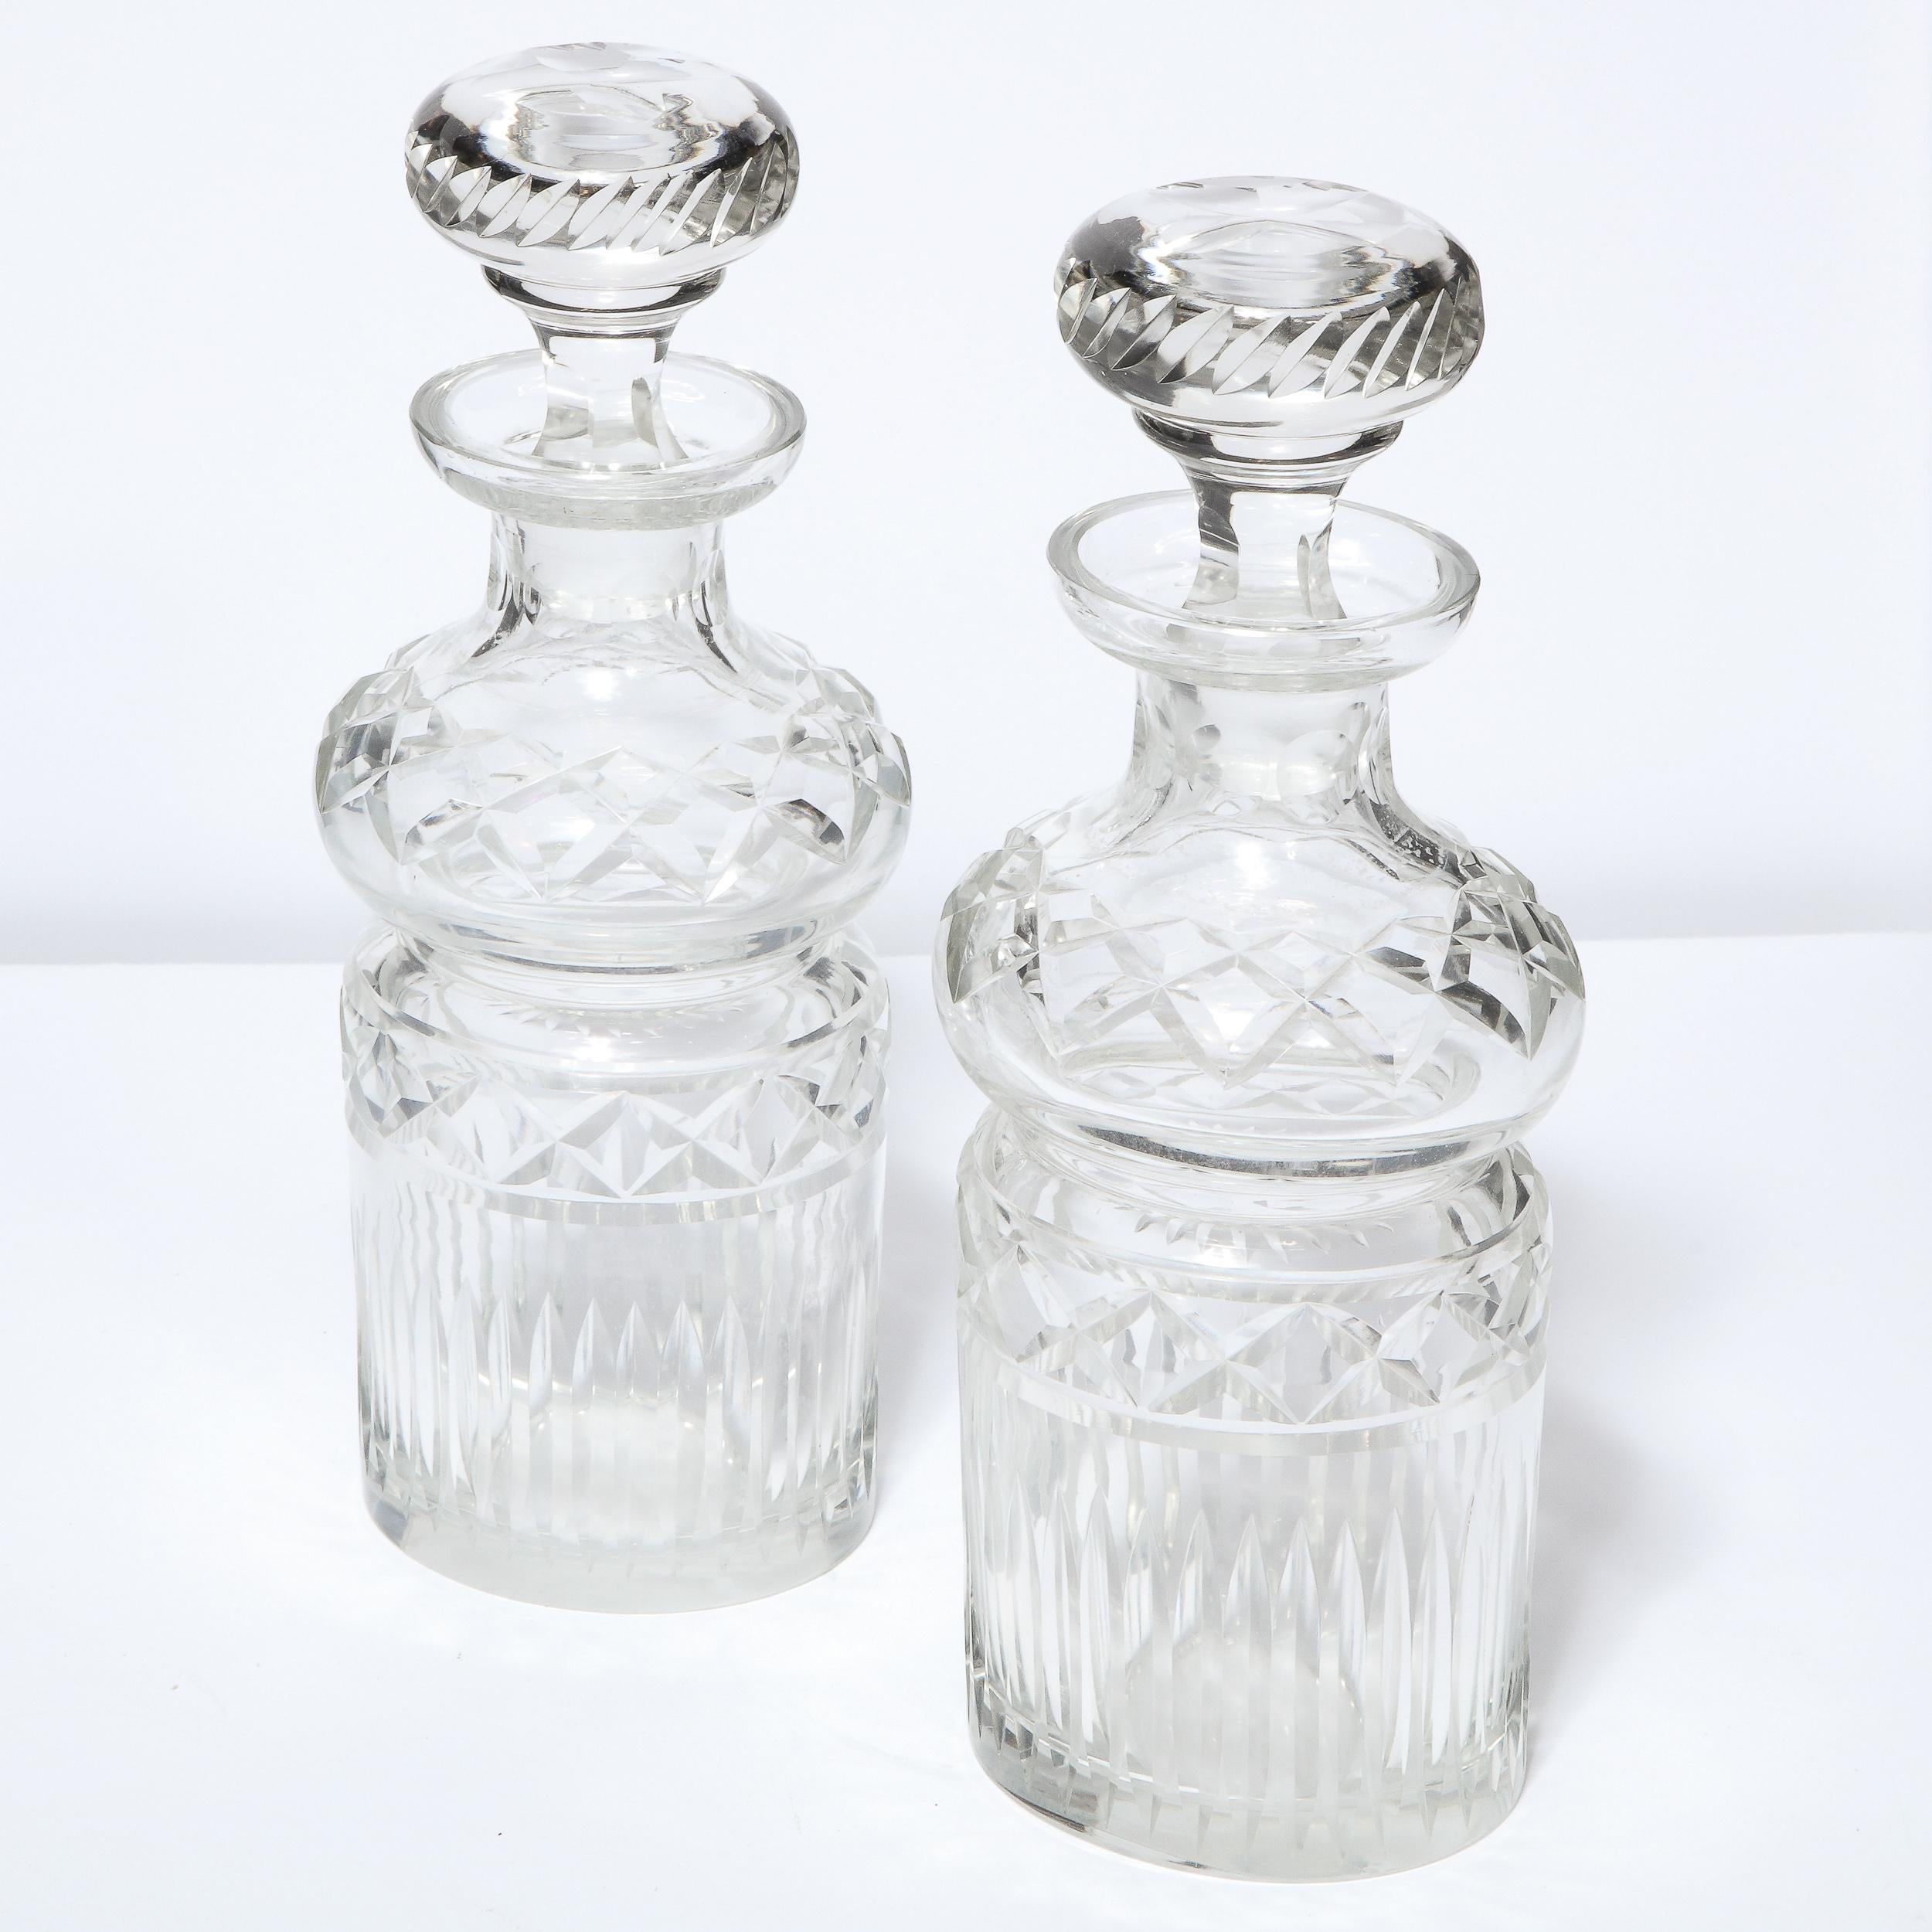 Pair of Mid-Century Modern Etched Translucent Crystal Decanters 9